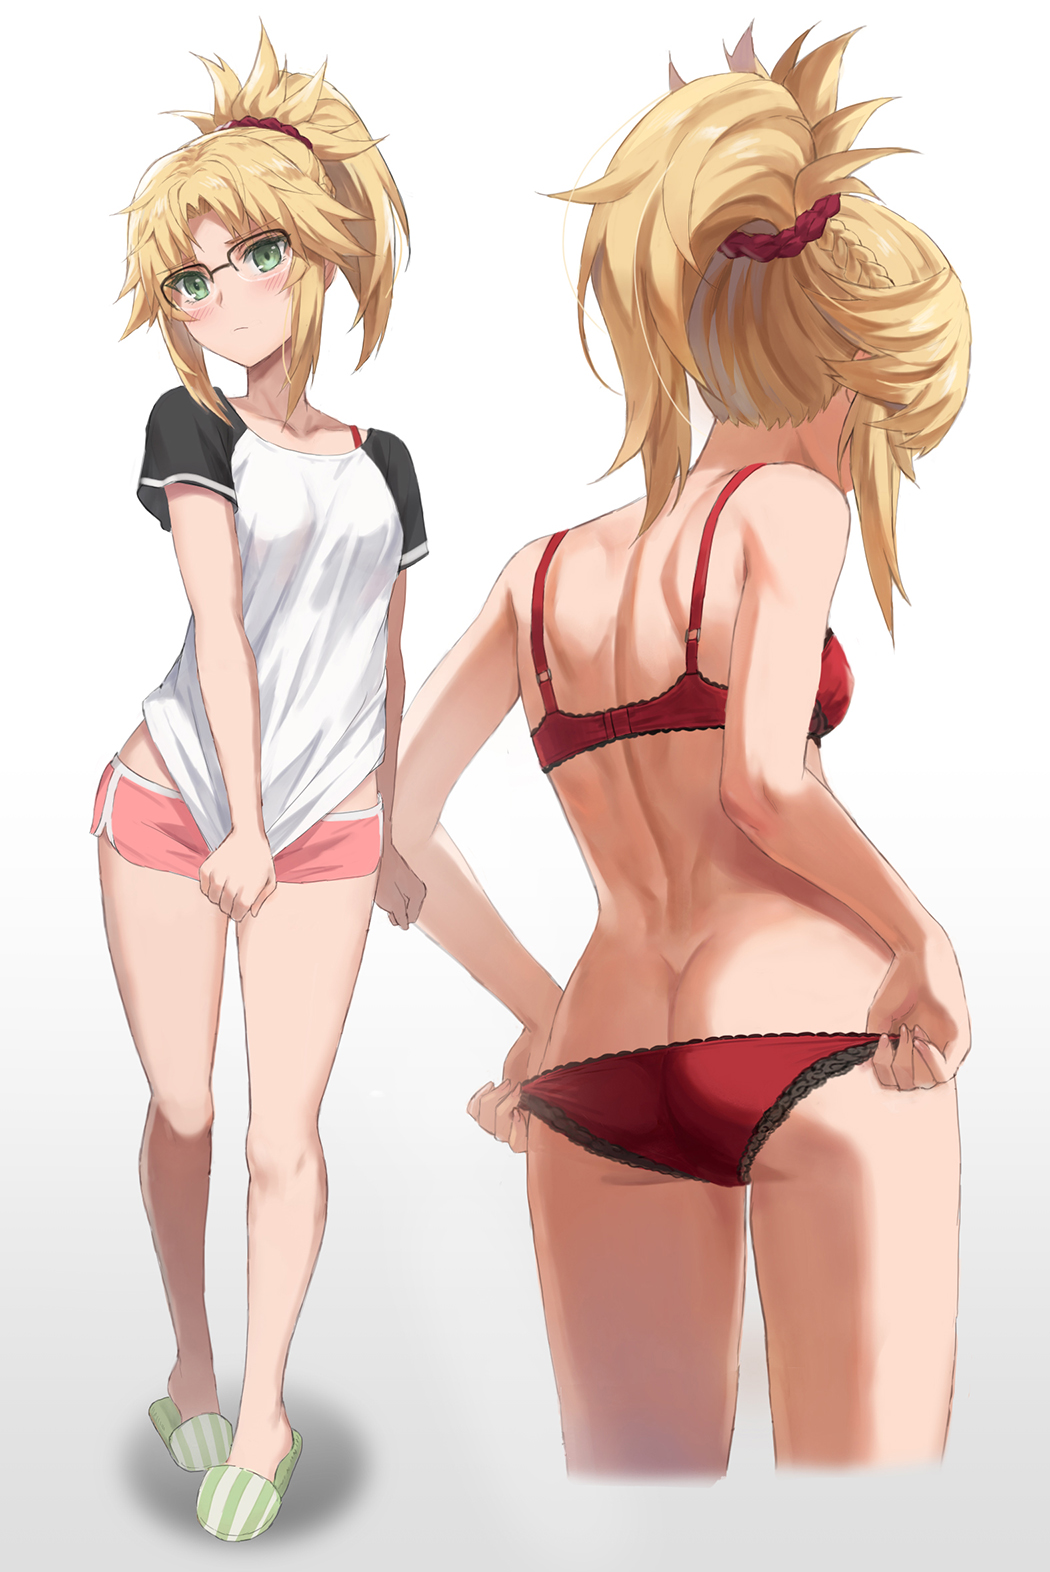 1girl ass back bangs blonde_hair bra braid breasts dolphin_shorts fate/apocrypha fate_(series) female_ass french_braid glasses green_eyes highres lace-trimmed_bra lace-trimmed_lingerie lace-trimmed_panties lace-trimmed_underwear lace_trim lingerie long_hair looking_at_viewer mordred_(fate) mordred_(fate/apocrypha) multiple_views panties parted_bangs pink_shorts ponytail red_bra red_lingerie red_panties red_underwear short_shorts short_sleeves shorts sidelocks slippers small_breasts tonee type-moon underwear